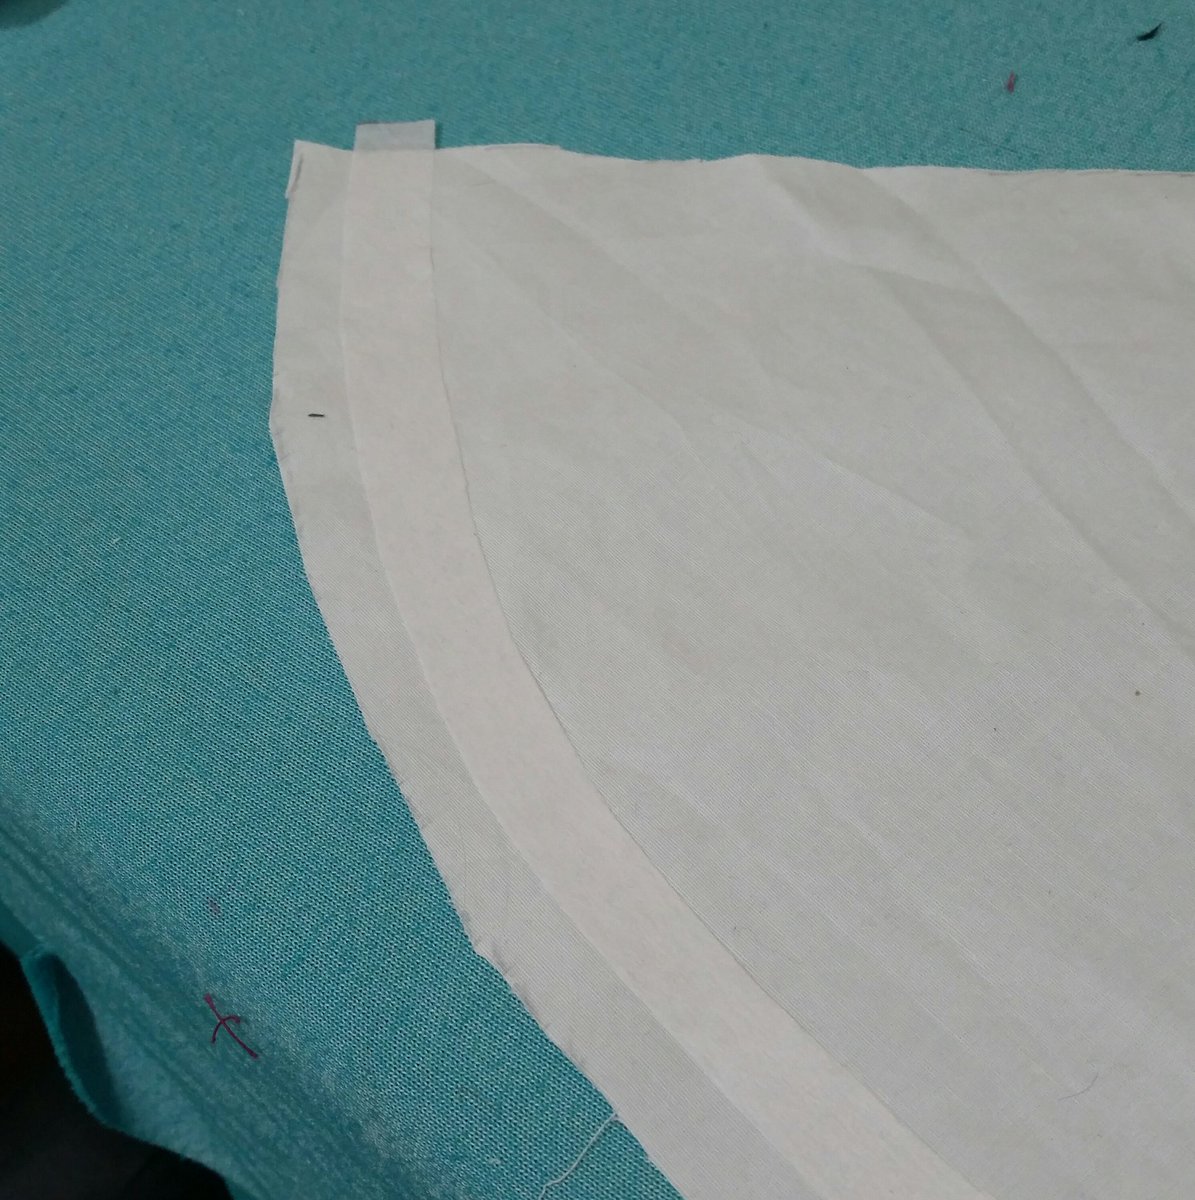 Ok so second test, with a poplin--I wanted to keep that cartoony line but not totally stiff, so I cut an arc of interfacing that got attached right along the hem then heat shaped into wavy ruffles. It needs fussing but I think the effect is good